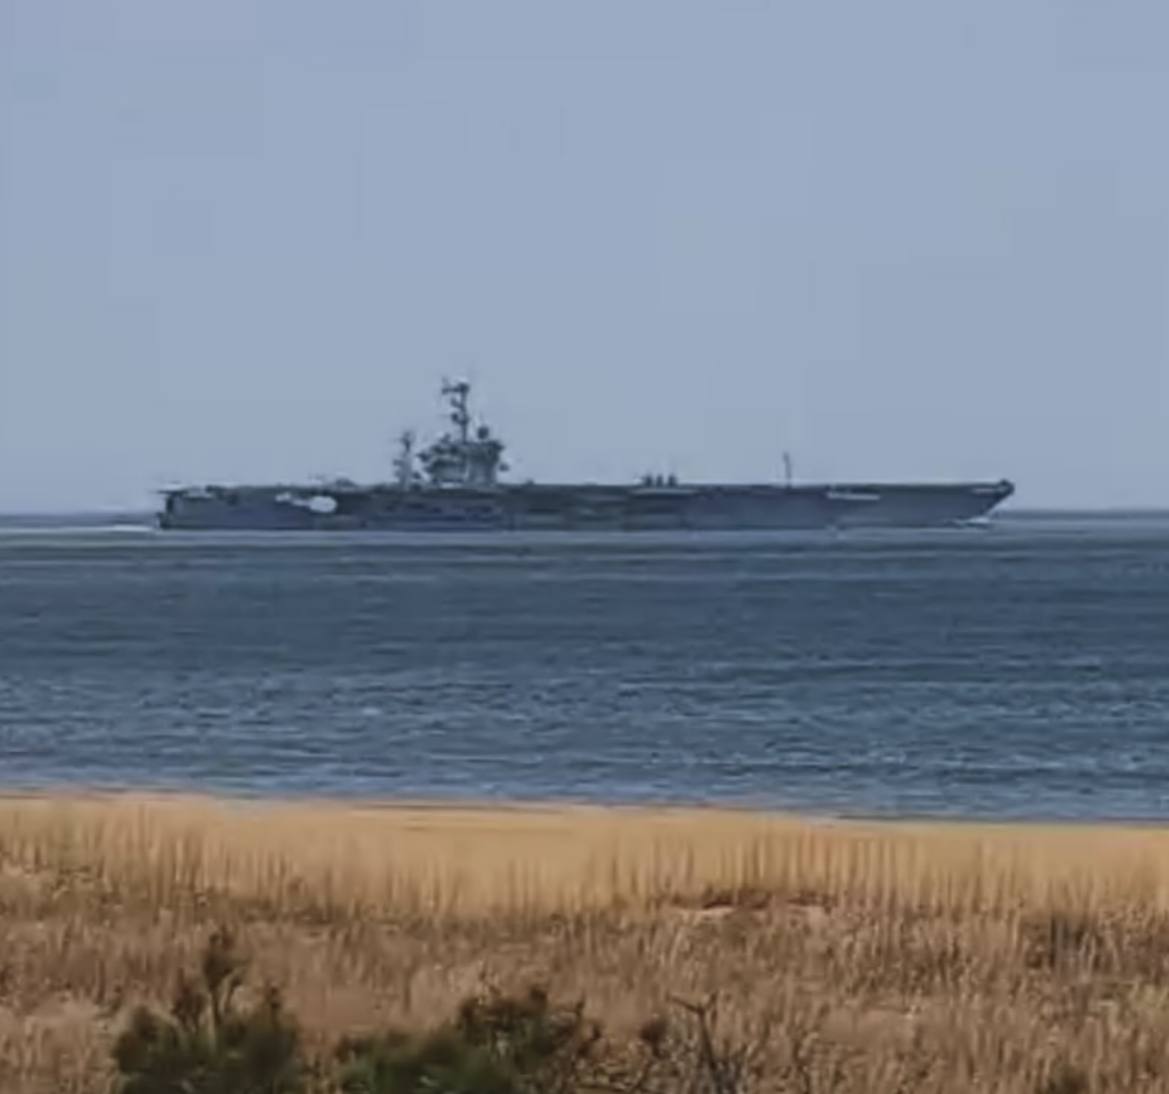 📸 US Navy is bringing the aircraft carrier CVN-69 (Dwight D. Eisenhower) closer to Israel, in an attempt to intercept the Iranian missiles, since the US does not want to put its military bases at risk. Via @savunmaisleri